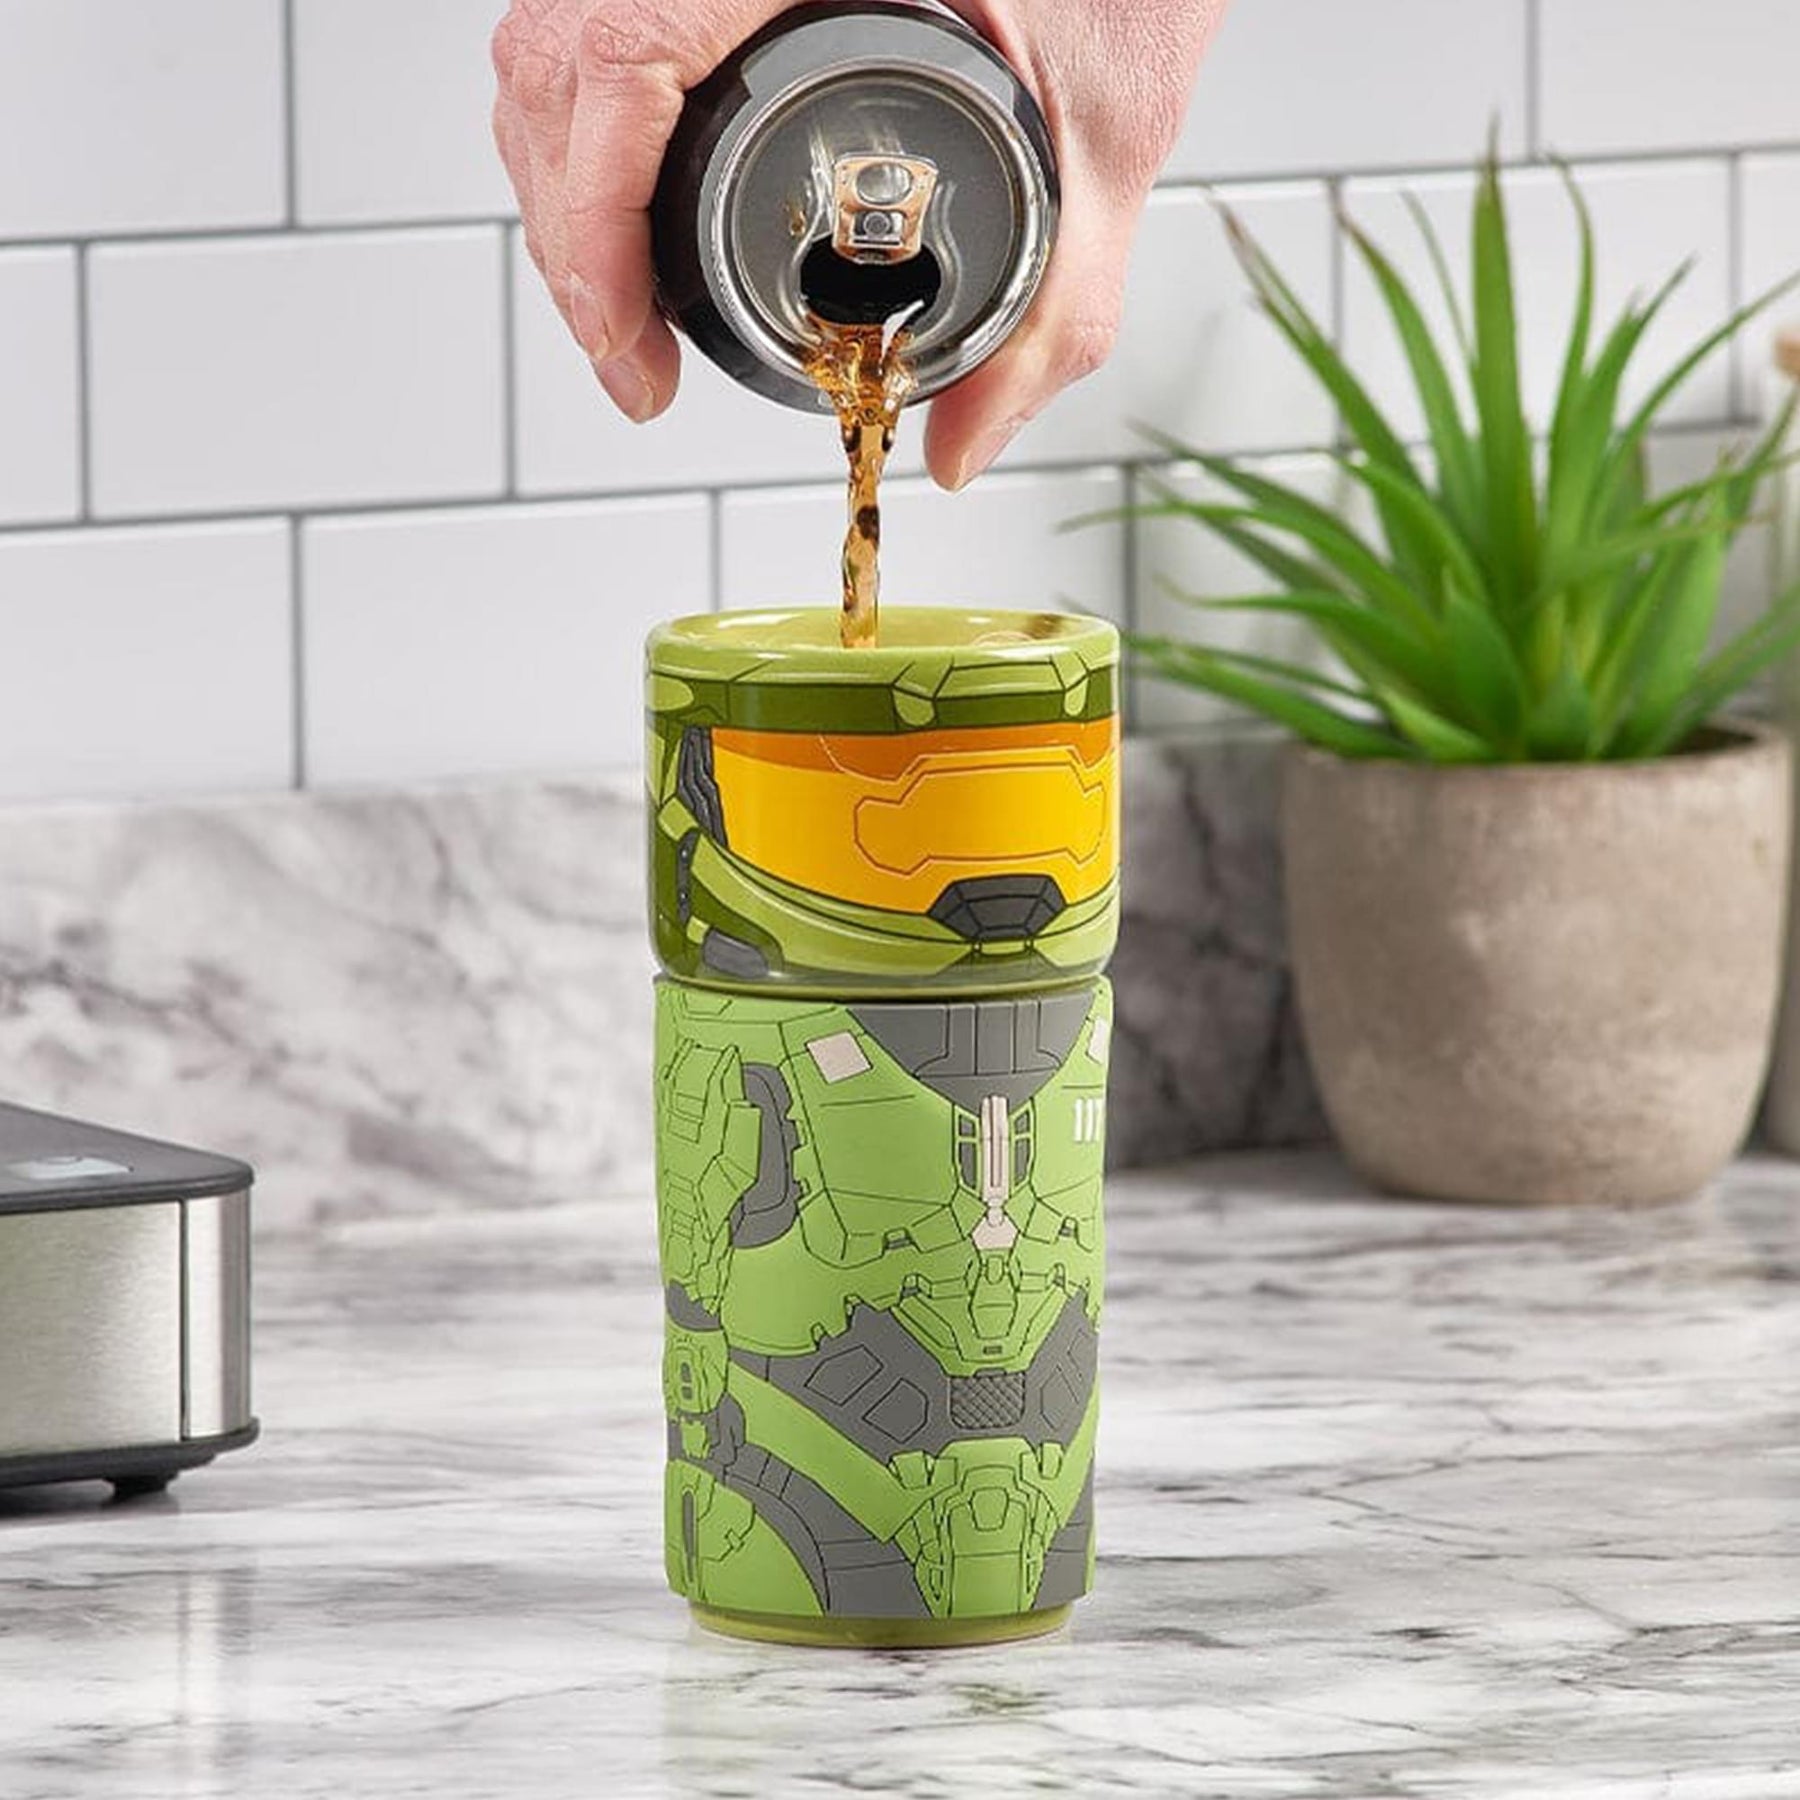 Halo Master Chief 14 Ounce Ceramic CosCup